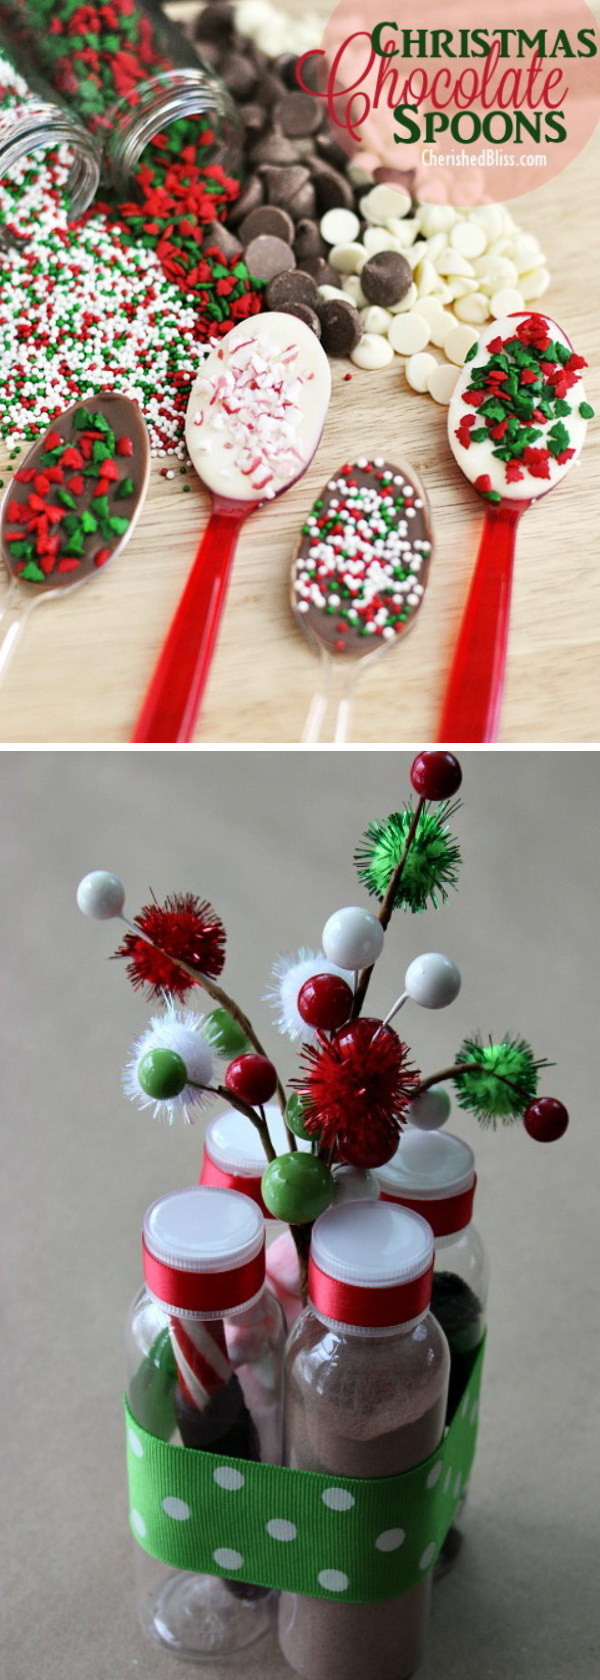 Homemade Holiday Gift Ideas
 20 Awesome DIY Christmas Gift Ideas & Tutorials